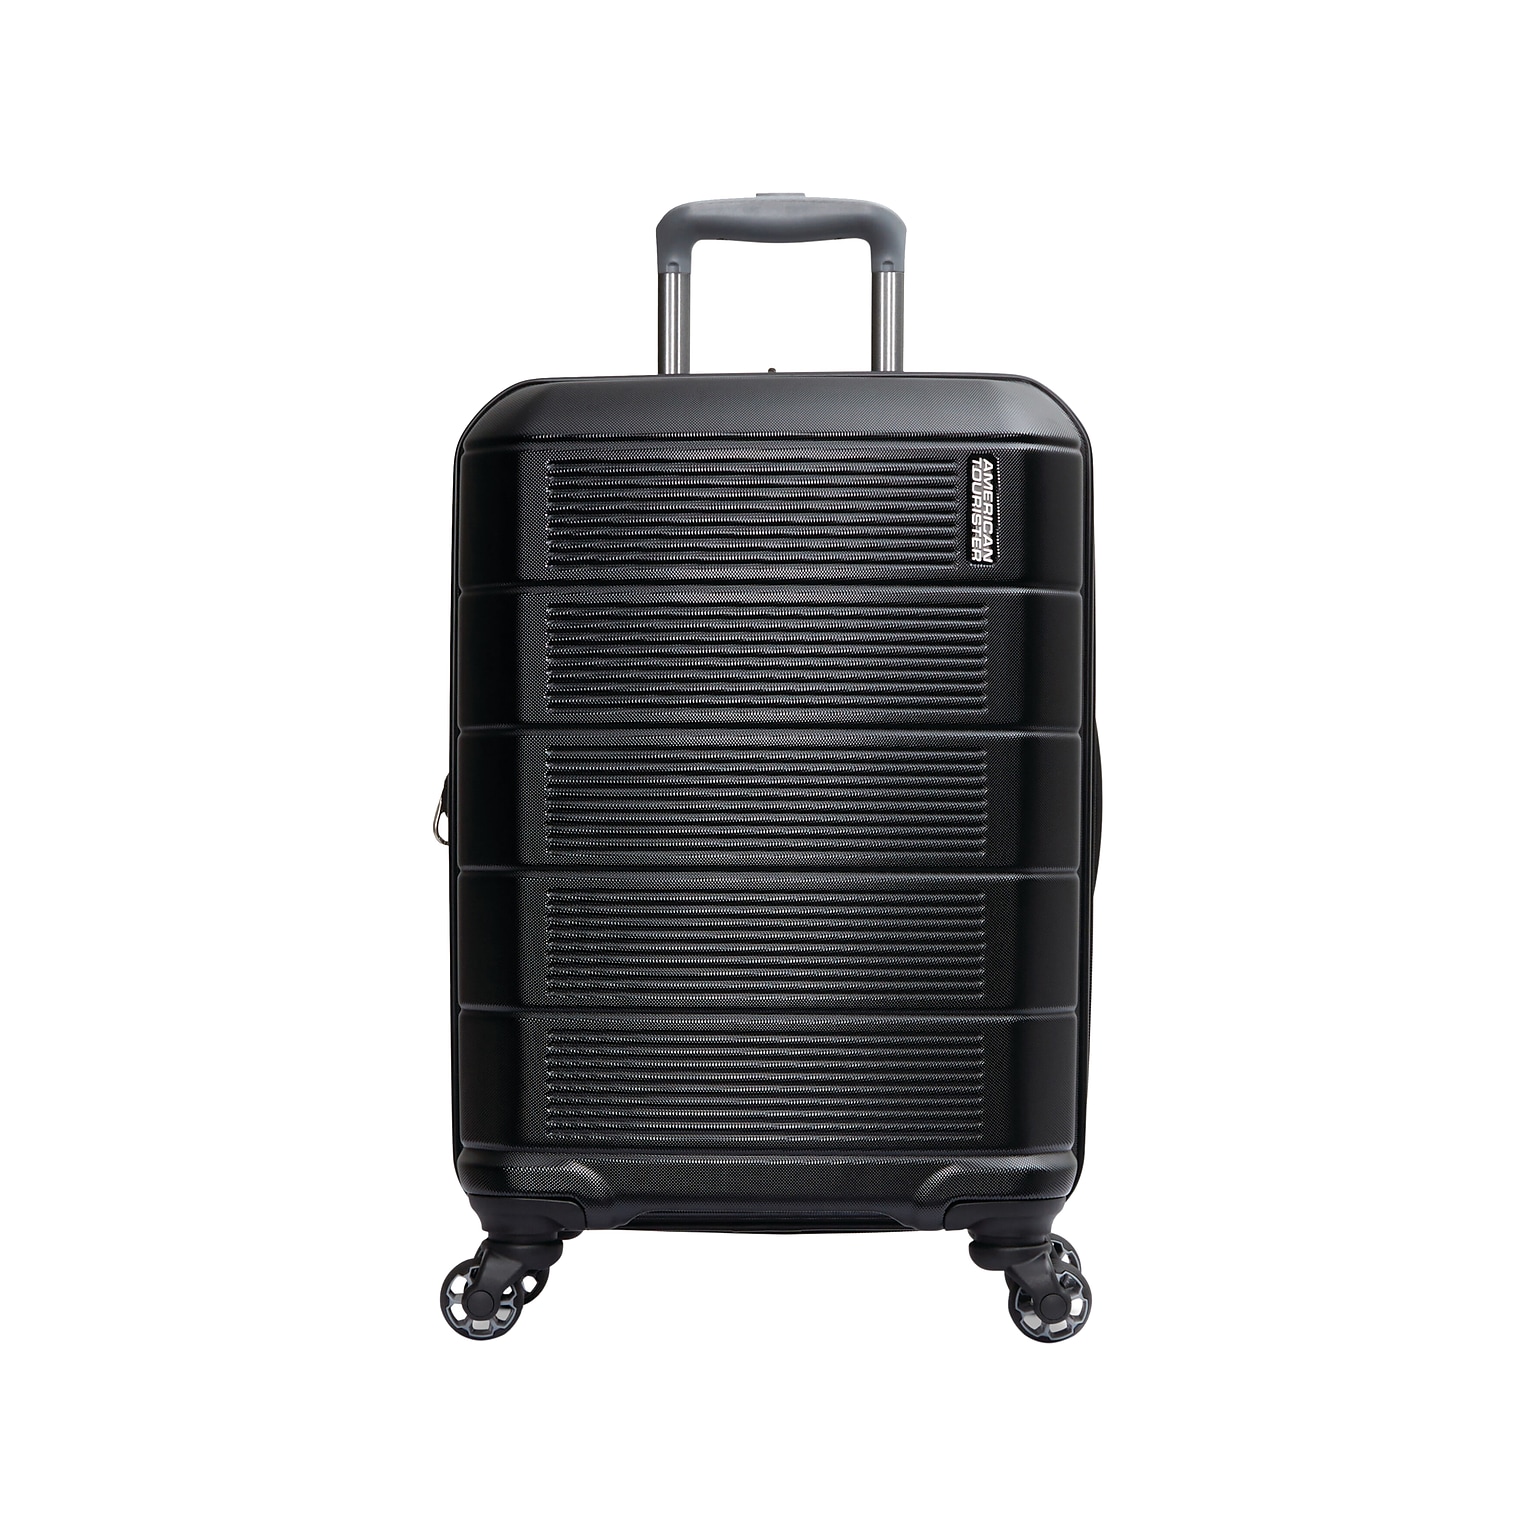 American Tourister Stratum 2.0 22 Hardside Carry-On Suitcase, 4-Wheeled Spinner, Jet Black  (142348-1465)